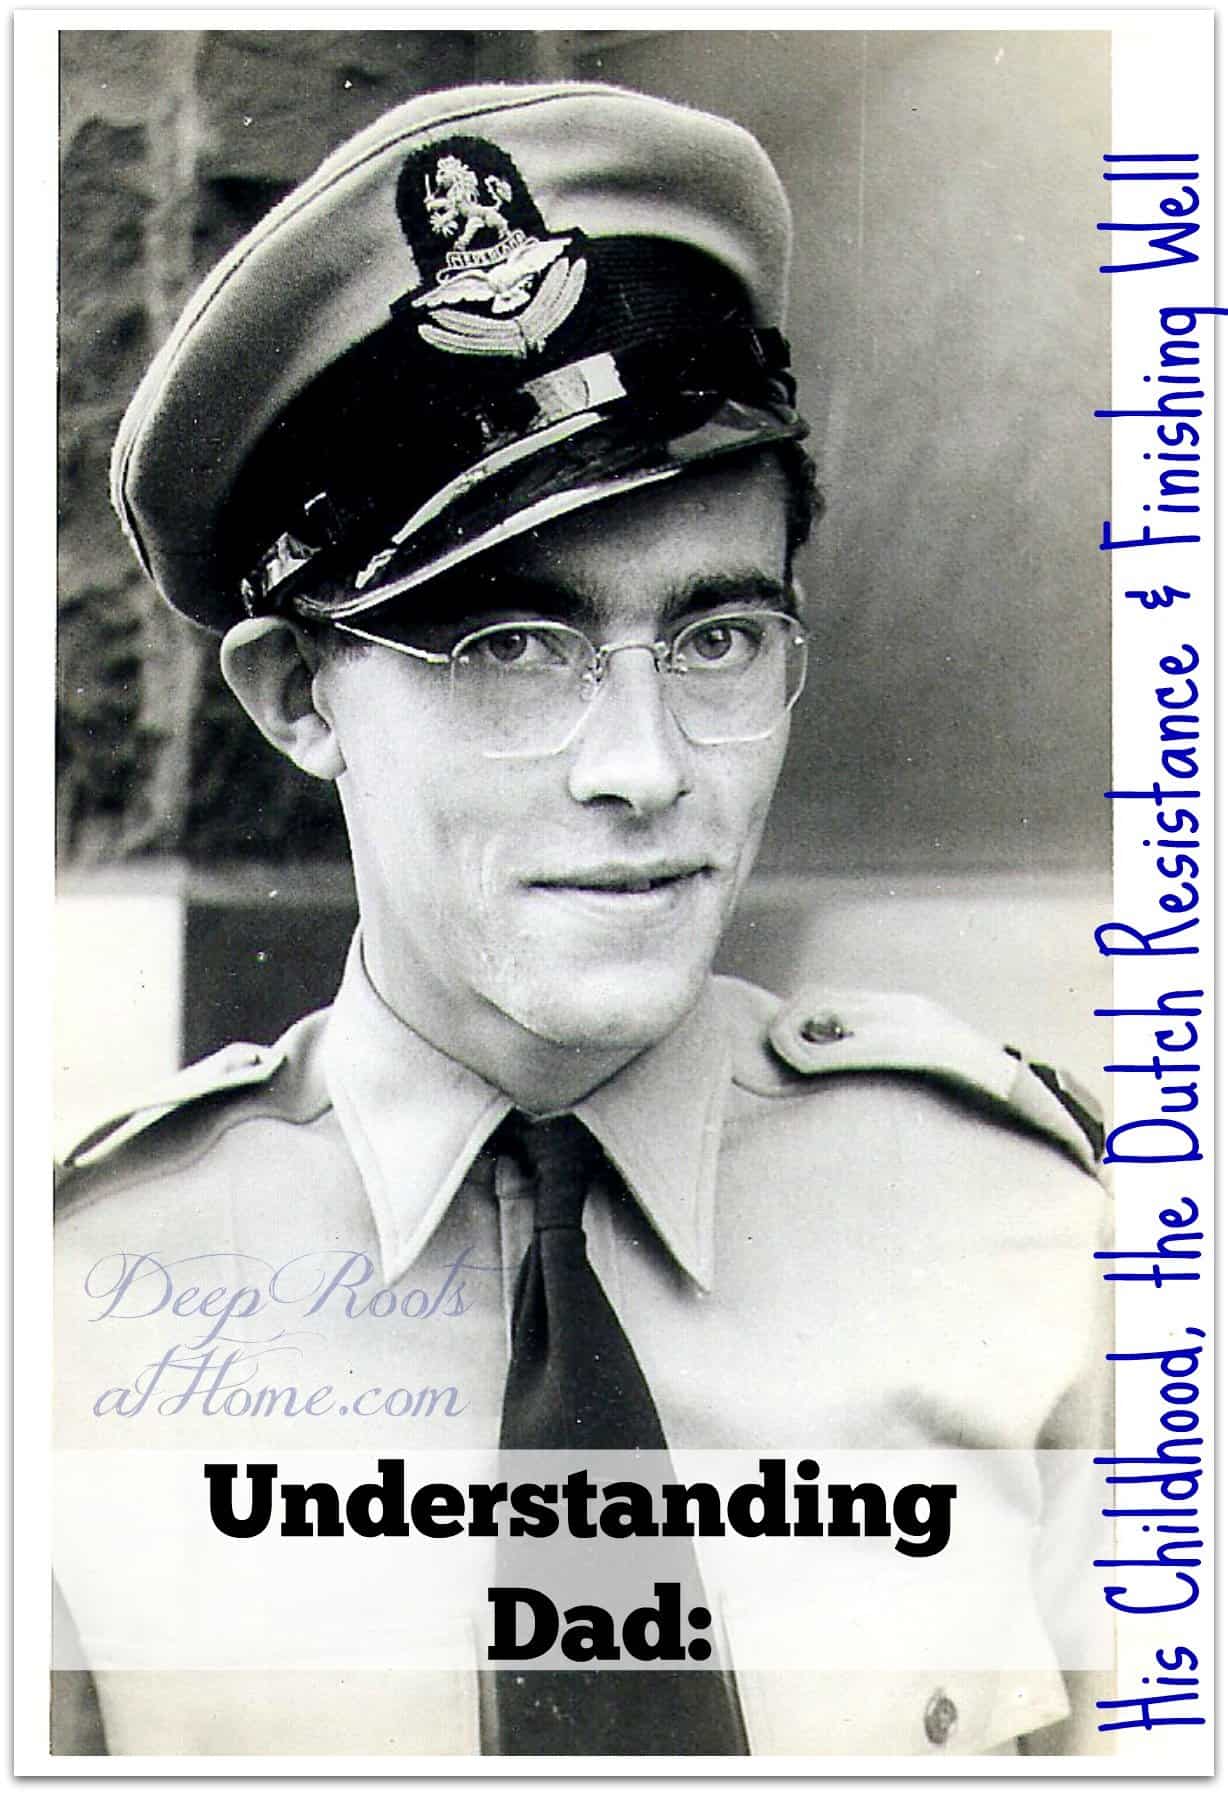 Understanding Dad: His Childhood, the Dutch Resistance & Finishing Well. My father in uniform